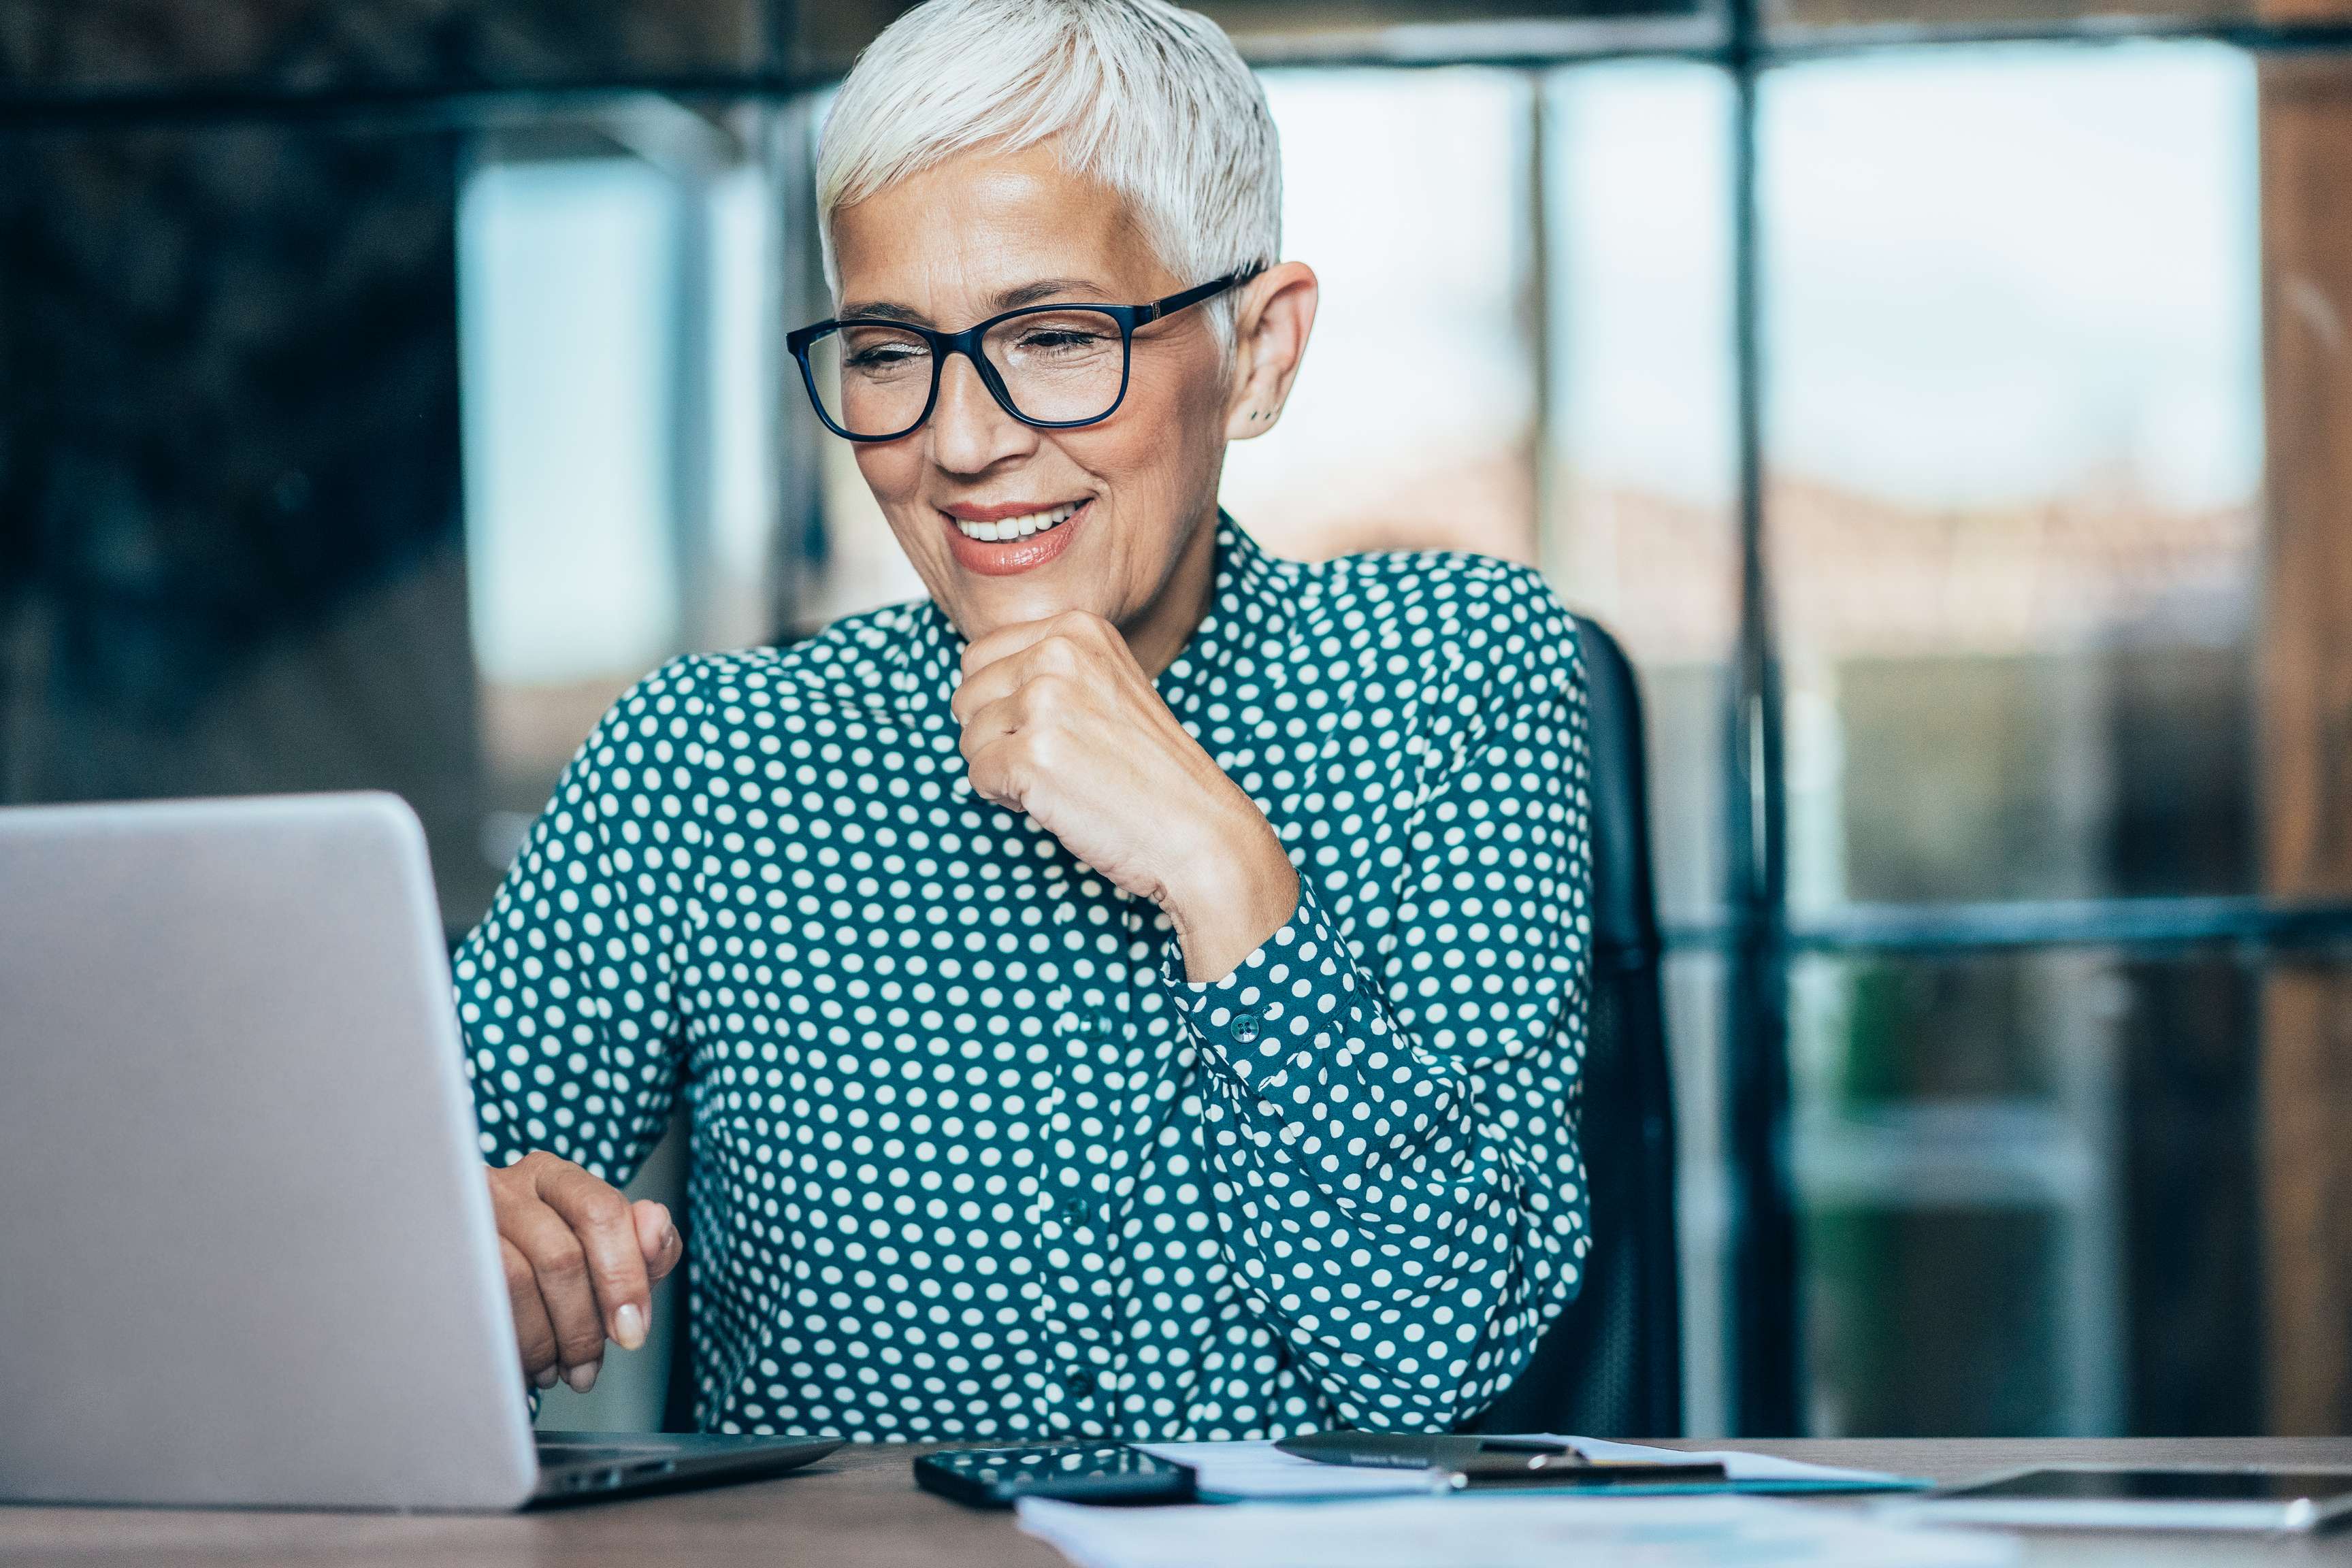 Woman wearing glasses and smiling sitting in front of laptop.